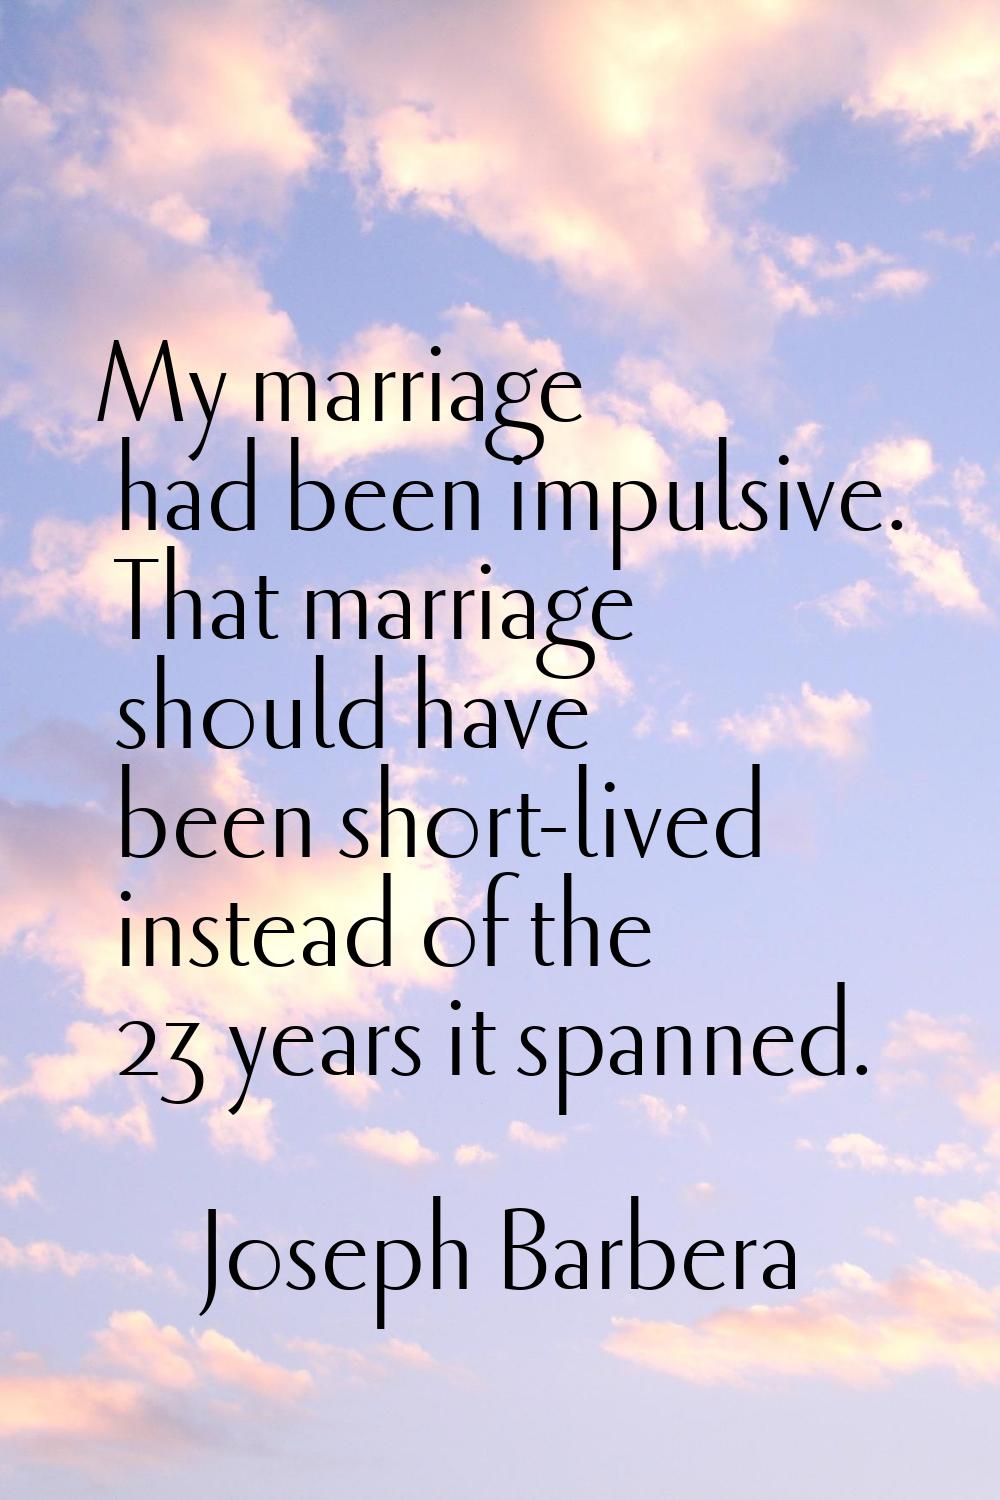 My marriage had been impulsive. That marriage should have been short-lived instead of the 23 years 